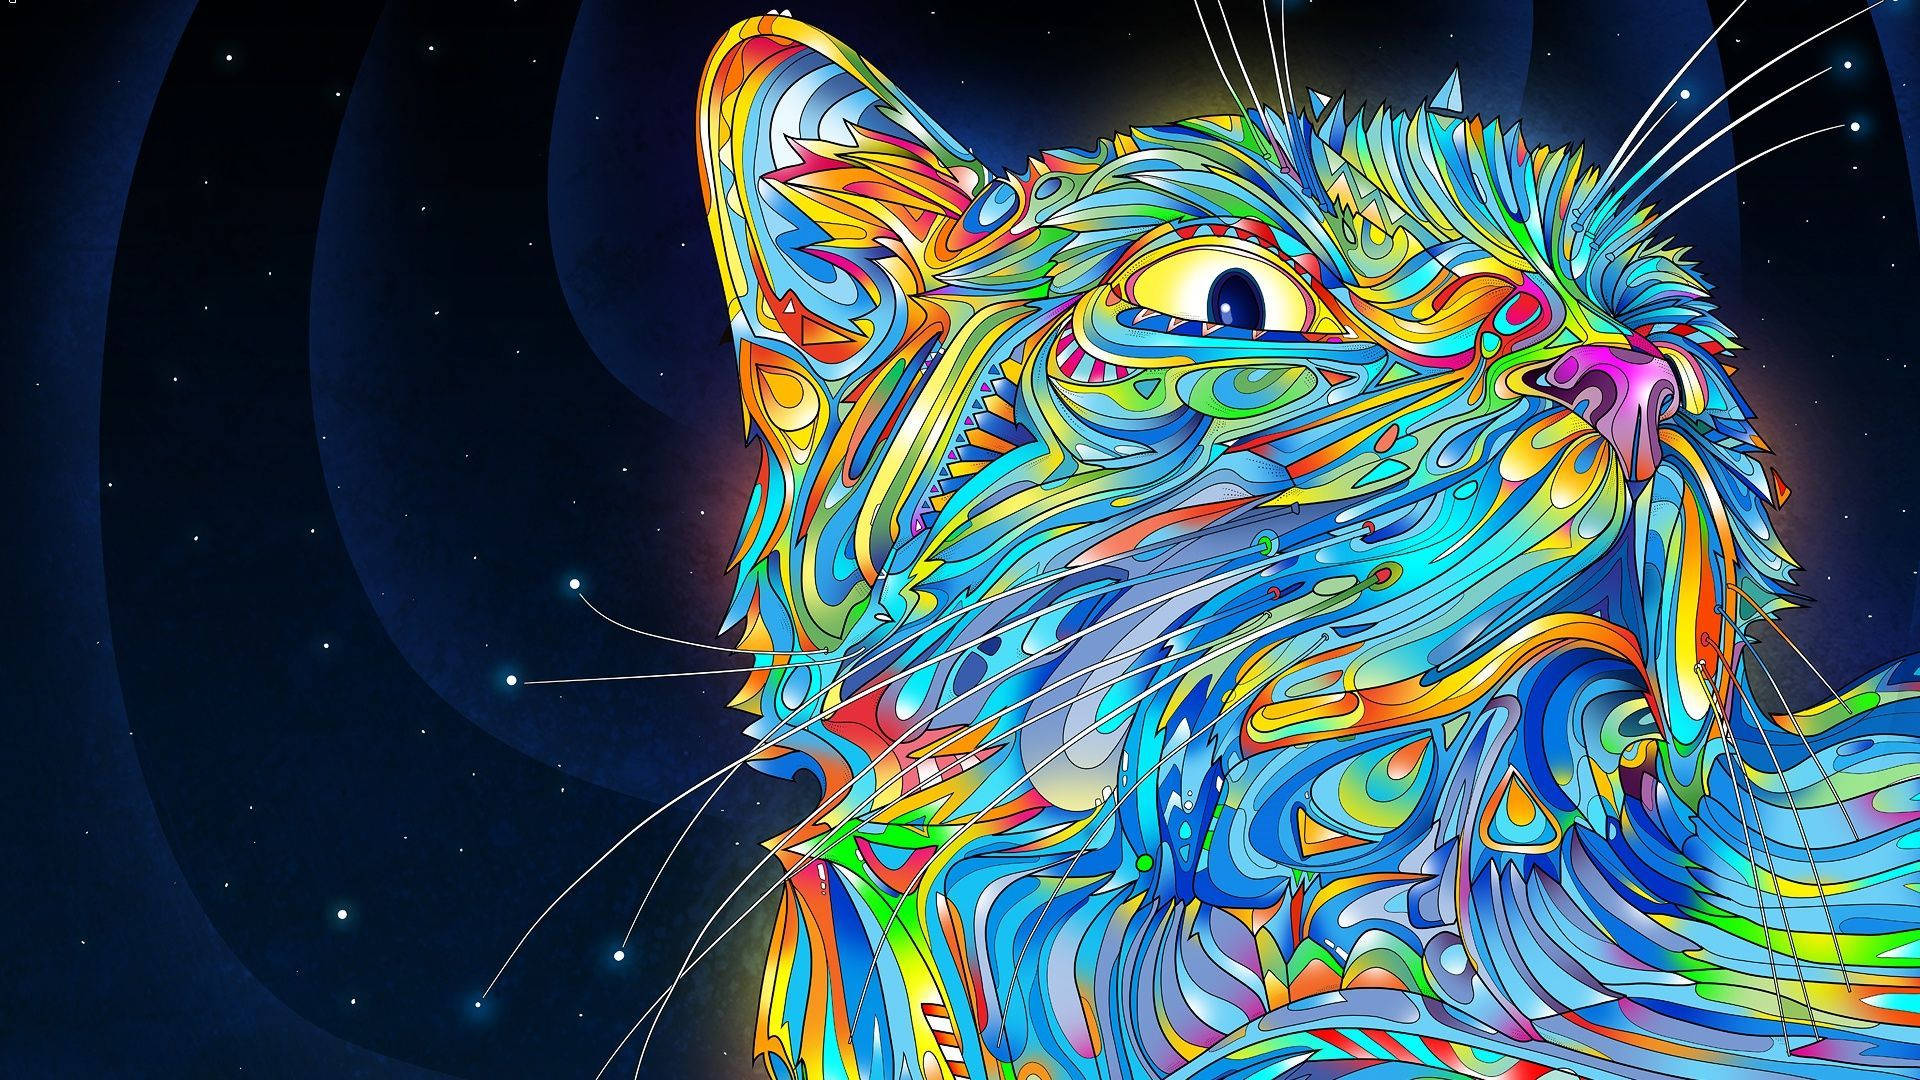 A psychedelic art wallpaper of lovely cat with glowing whiskers.